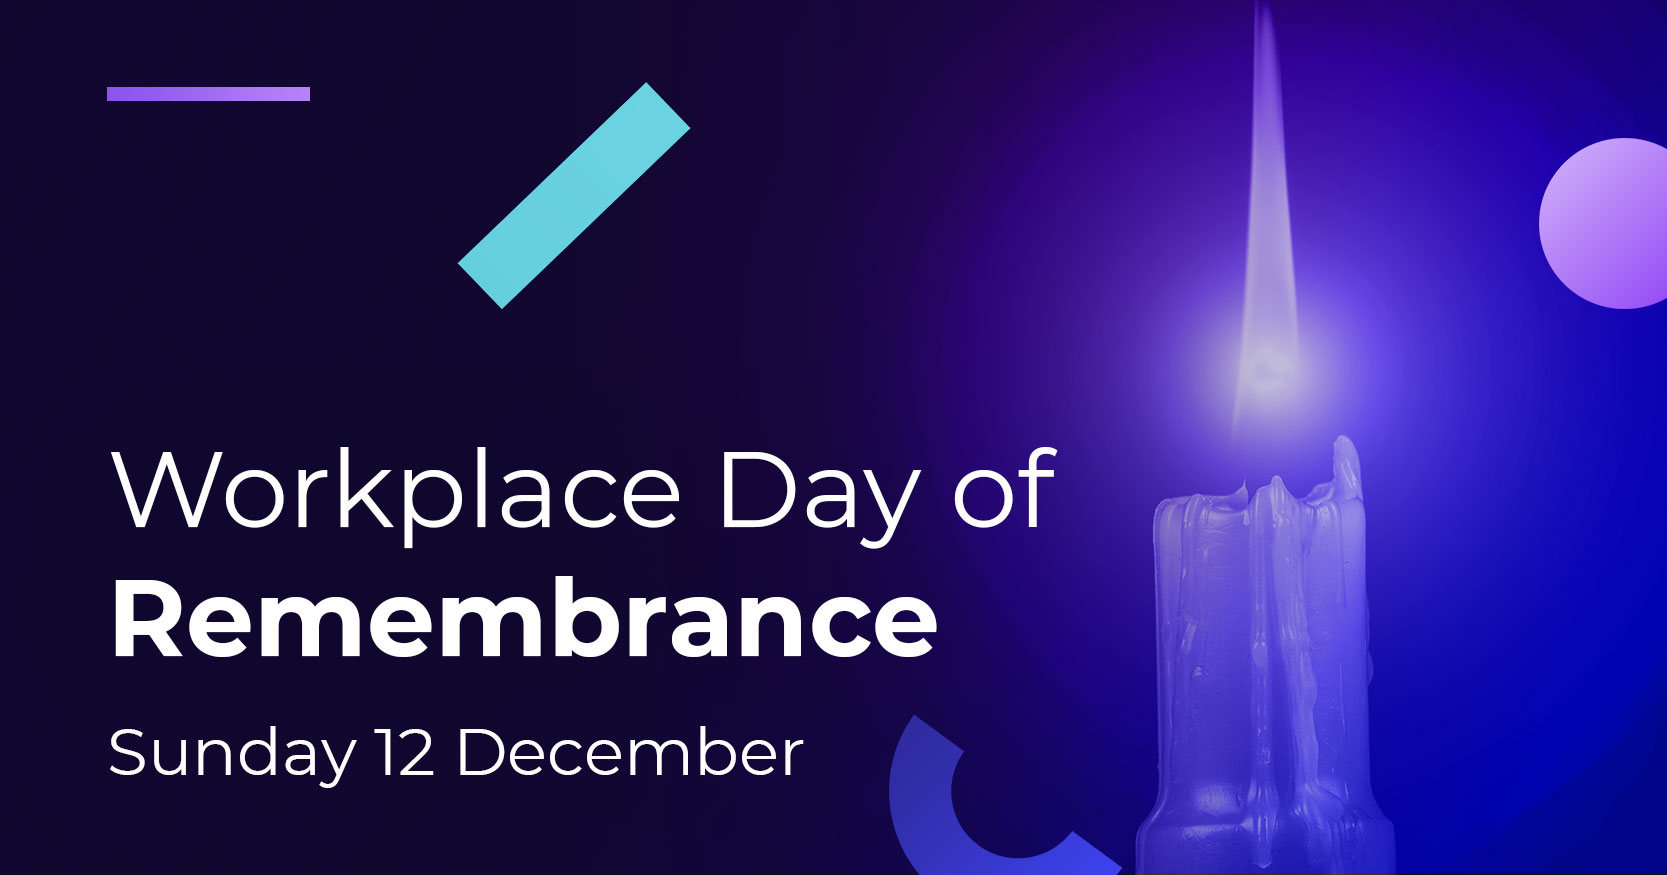 Workplace Day of Remembrance 2021 Image